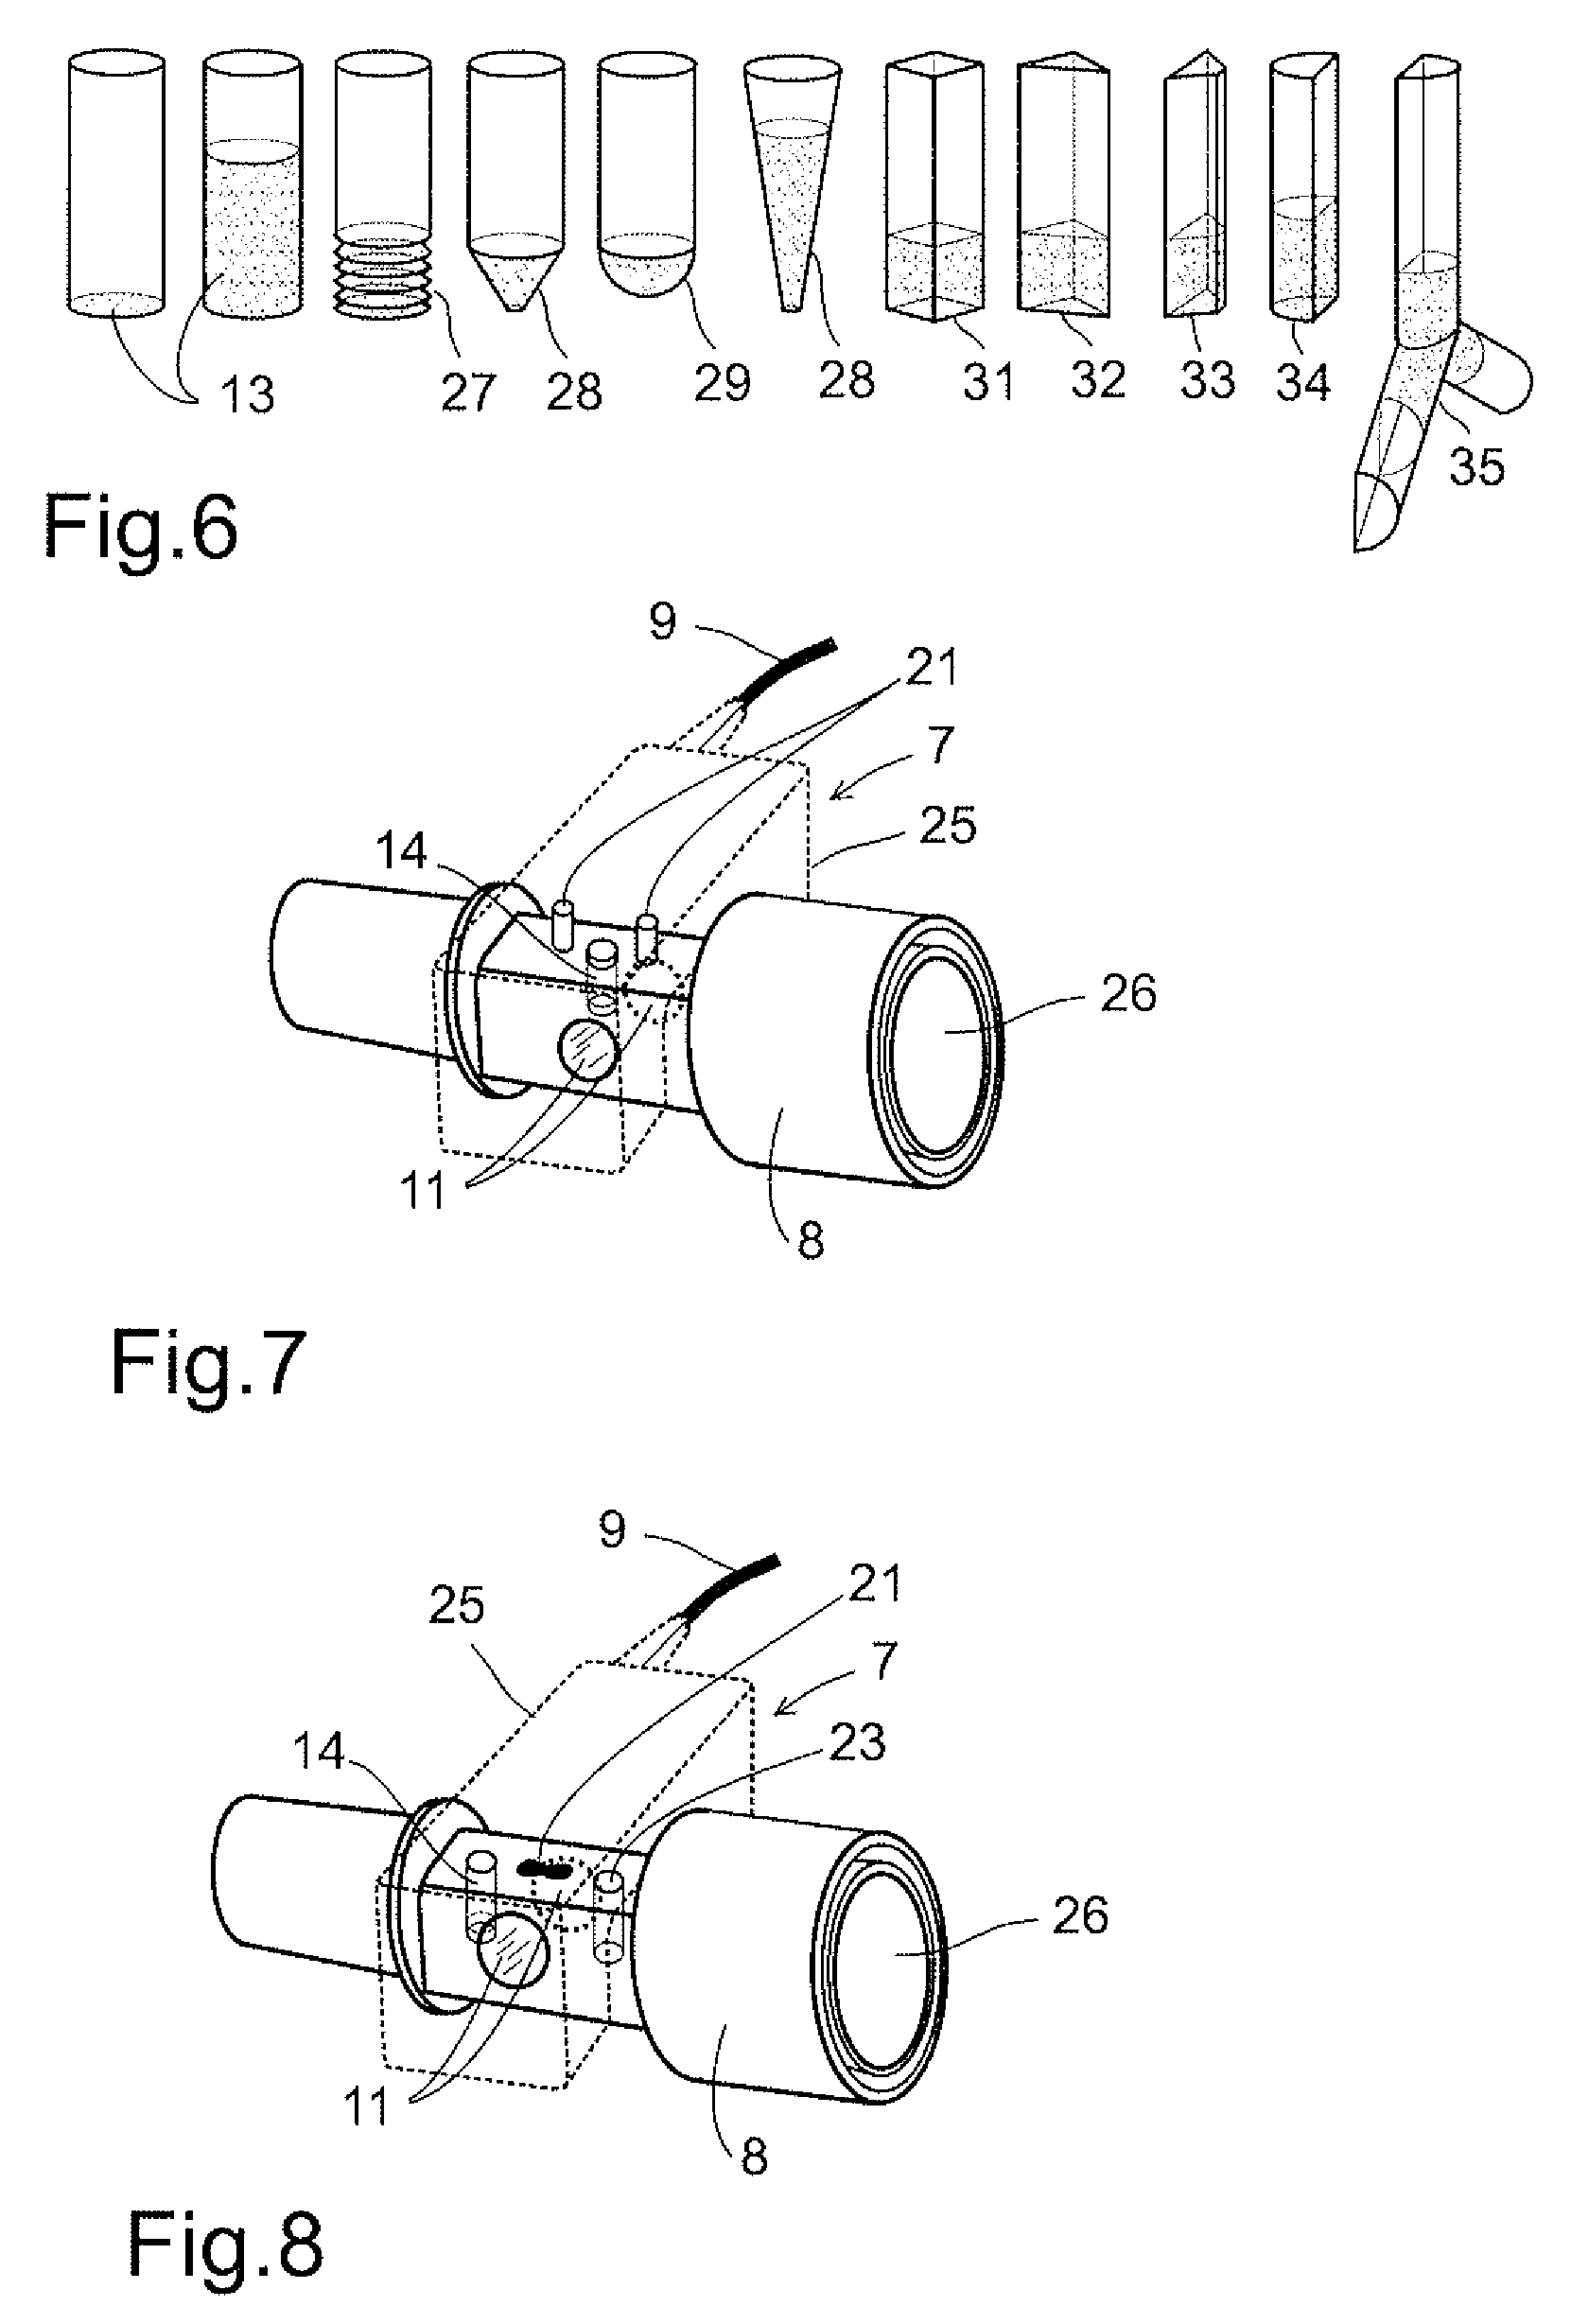 Airway adapter and gas analyzer for measuring oxygen concentration of a respiratory gas